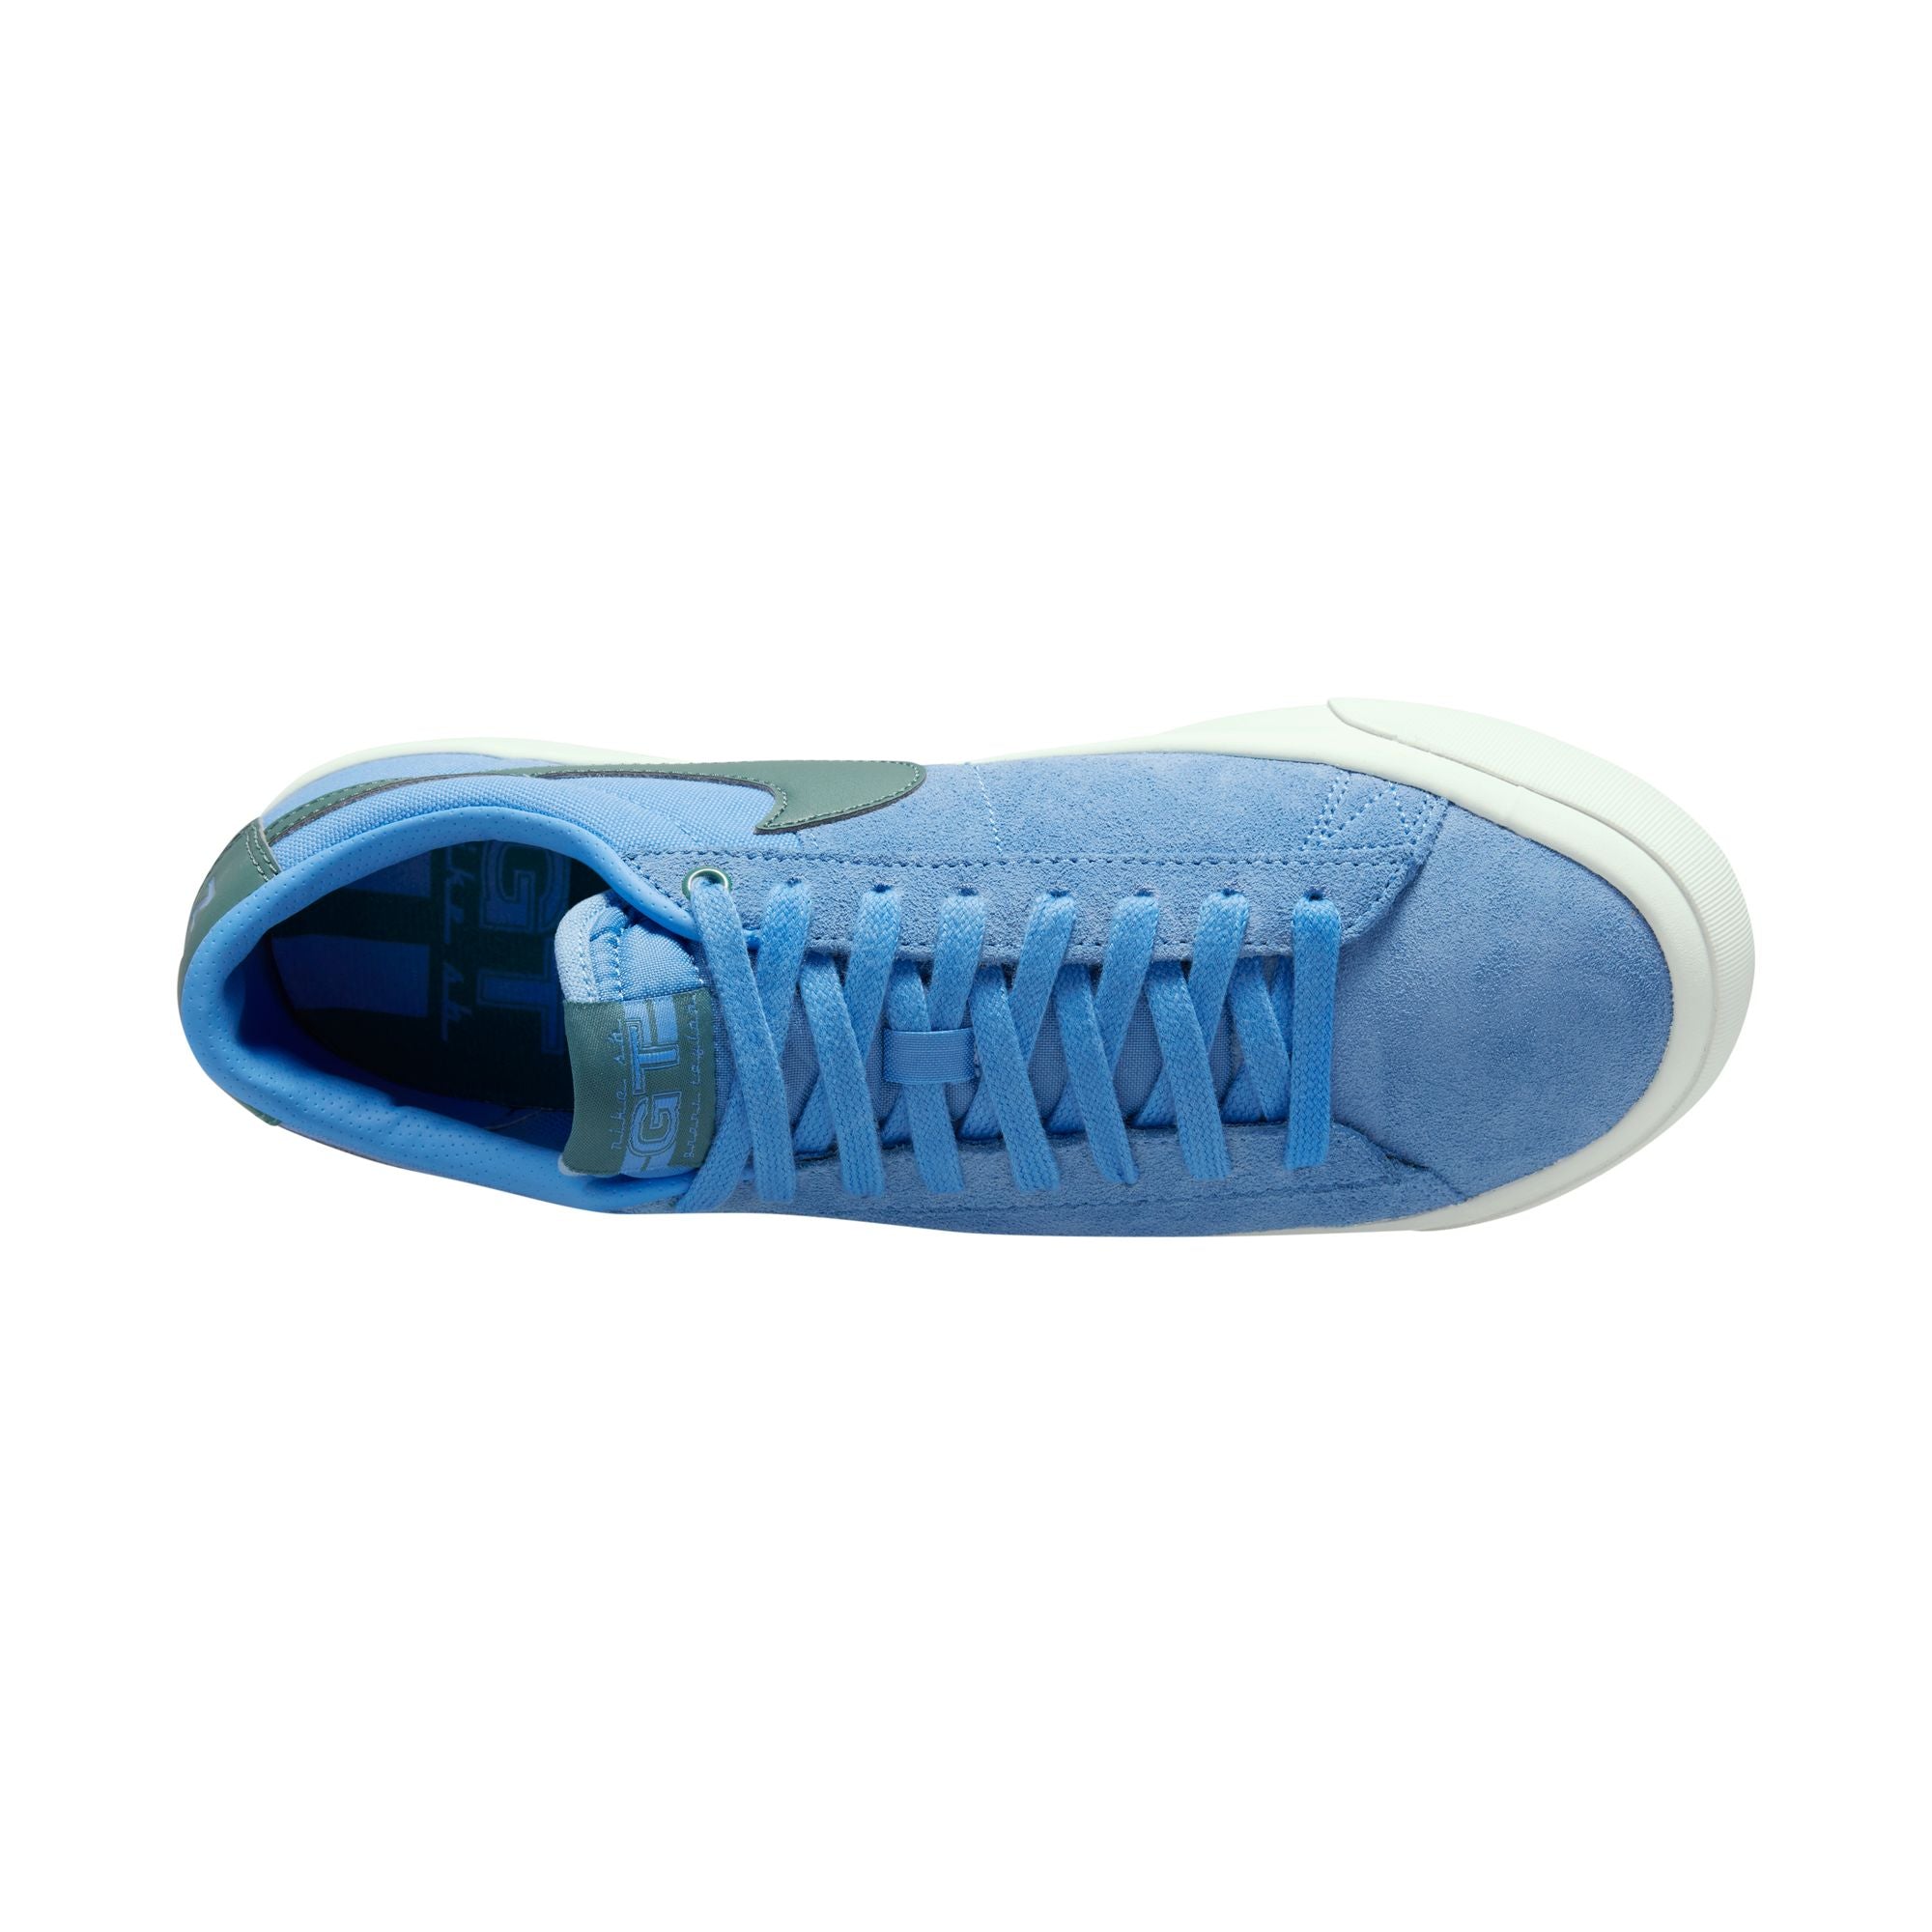 University blue nike sb blazer low top shoes with teal nike tick and white sole. Free uk shipping over £50